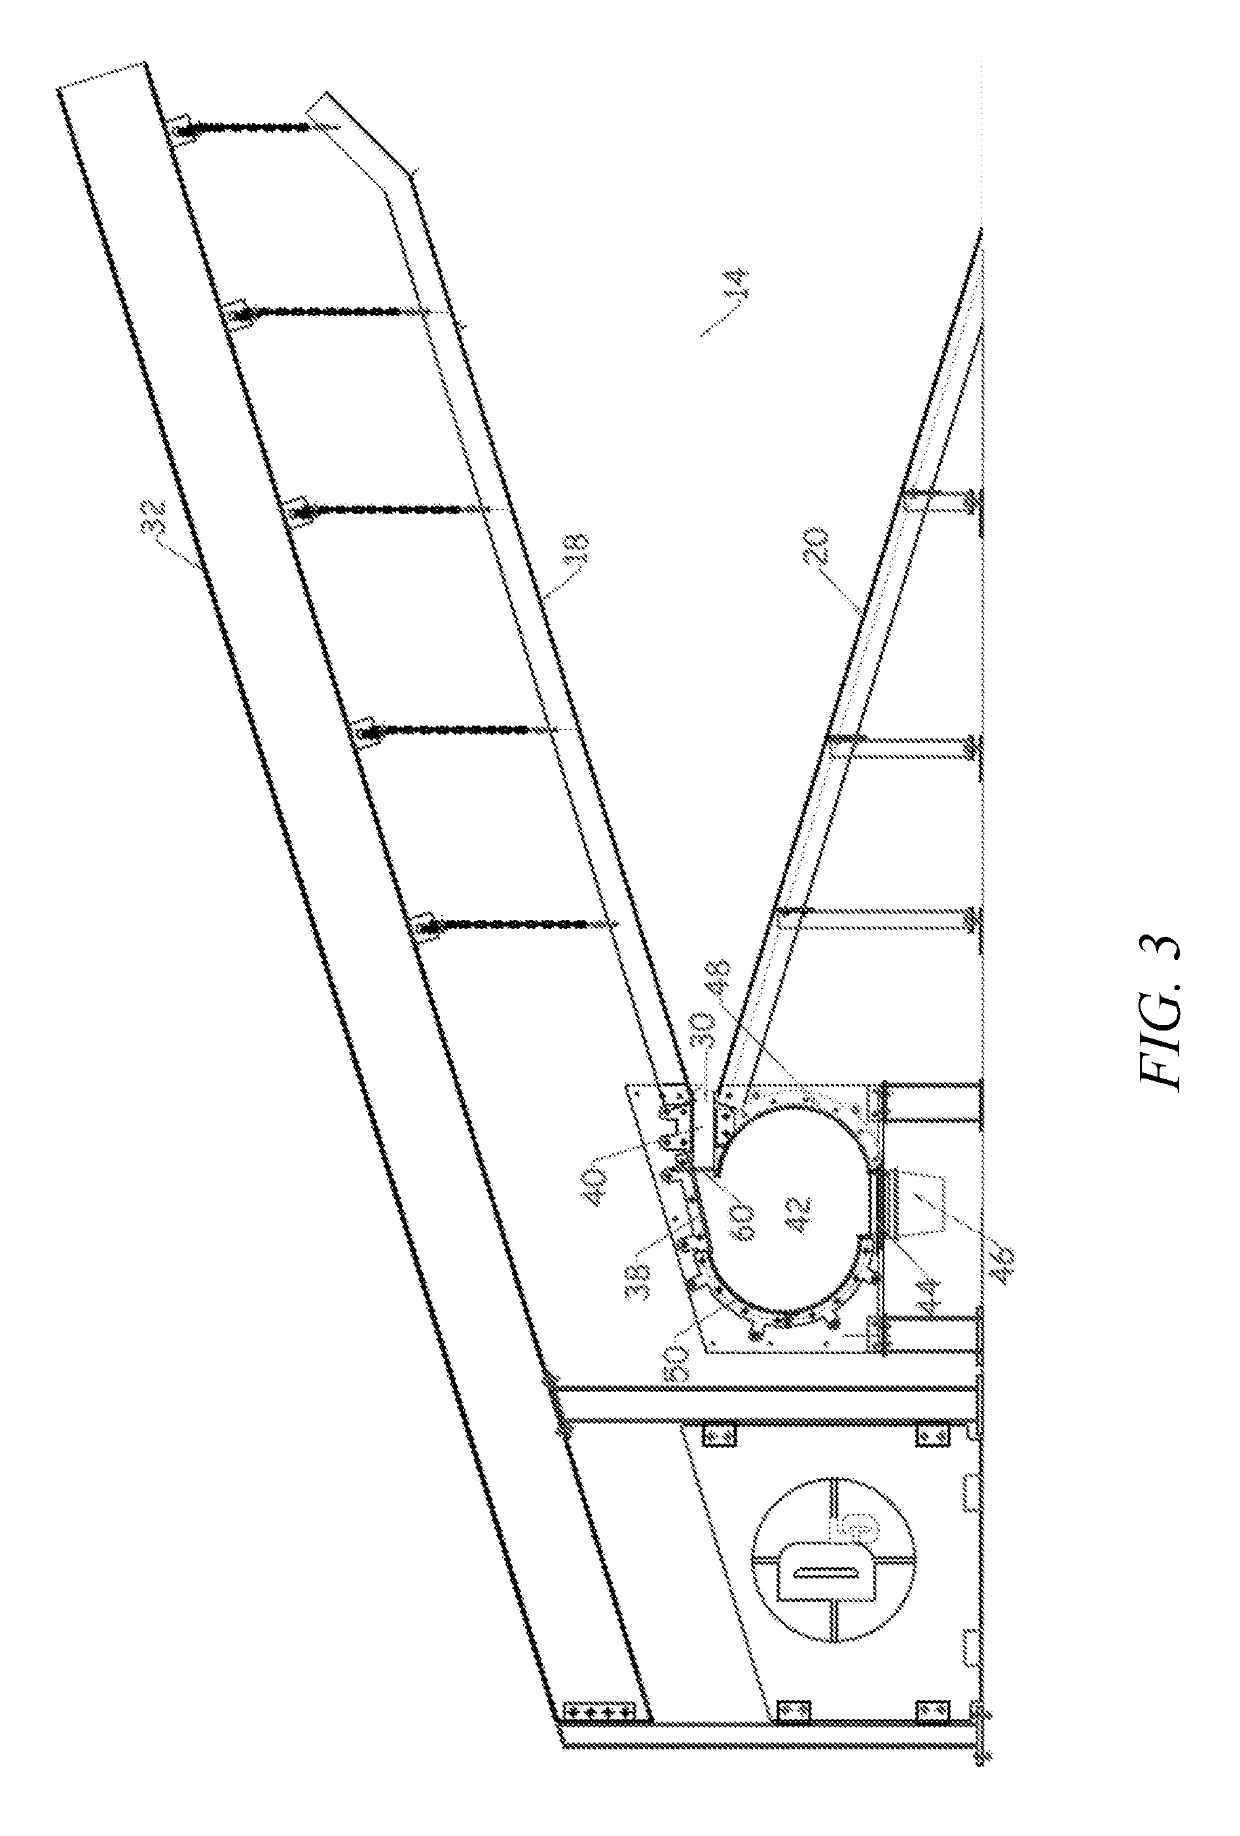 Bullet trap systems and methods of using the same